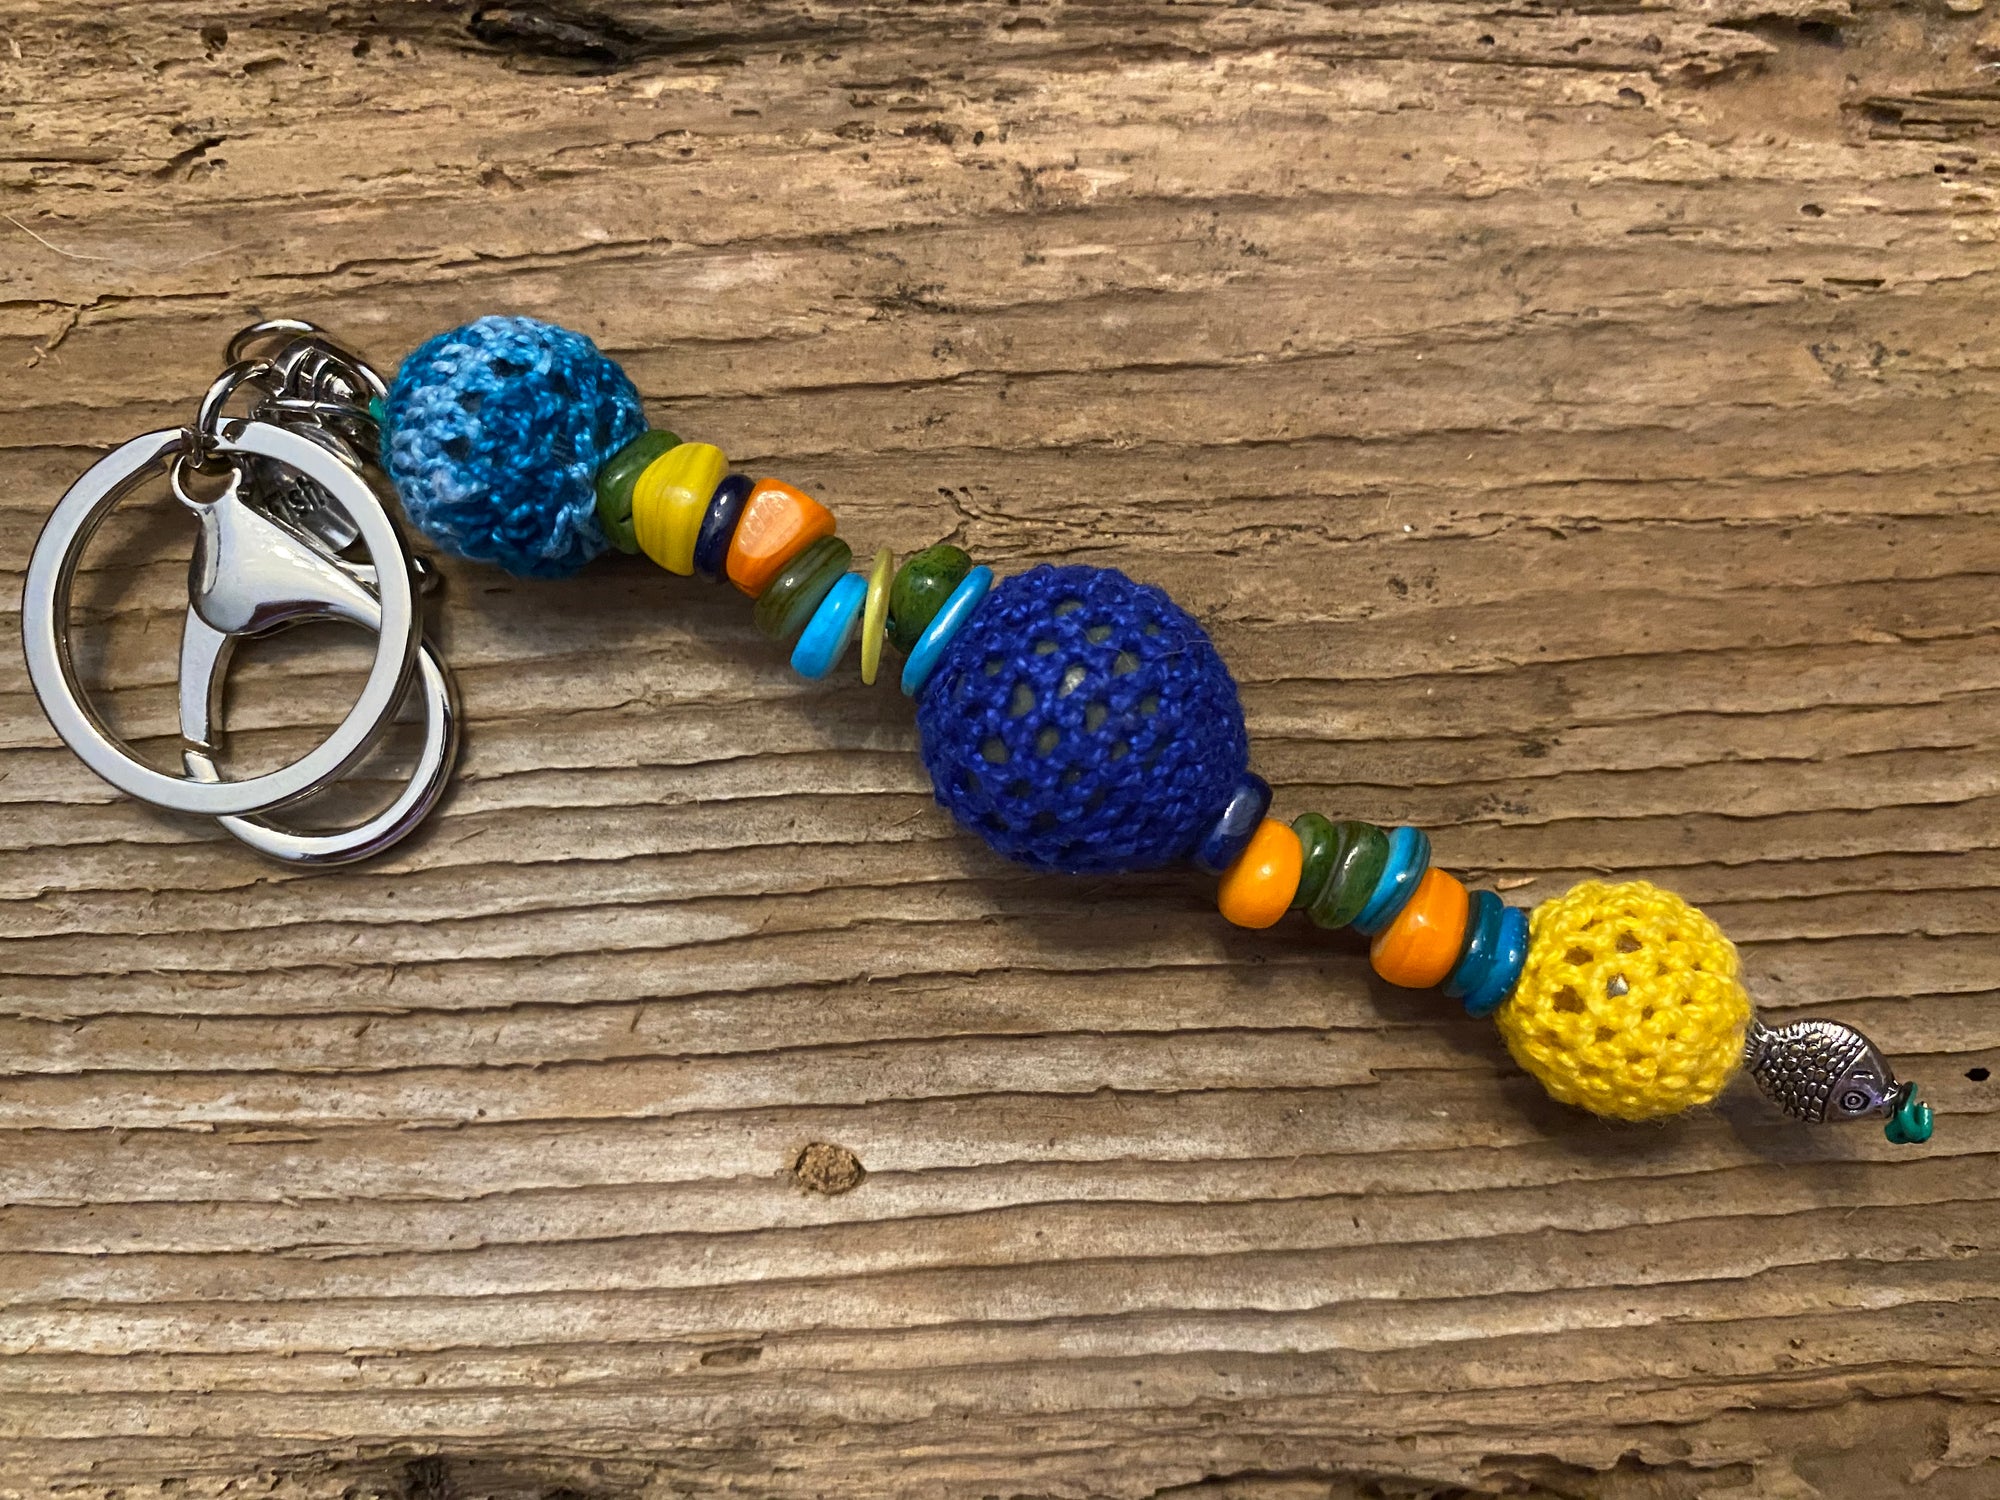 Shanga Keychain teal stripe, navy and lemon macramé beads with colorful stone accents